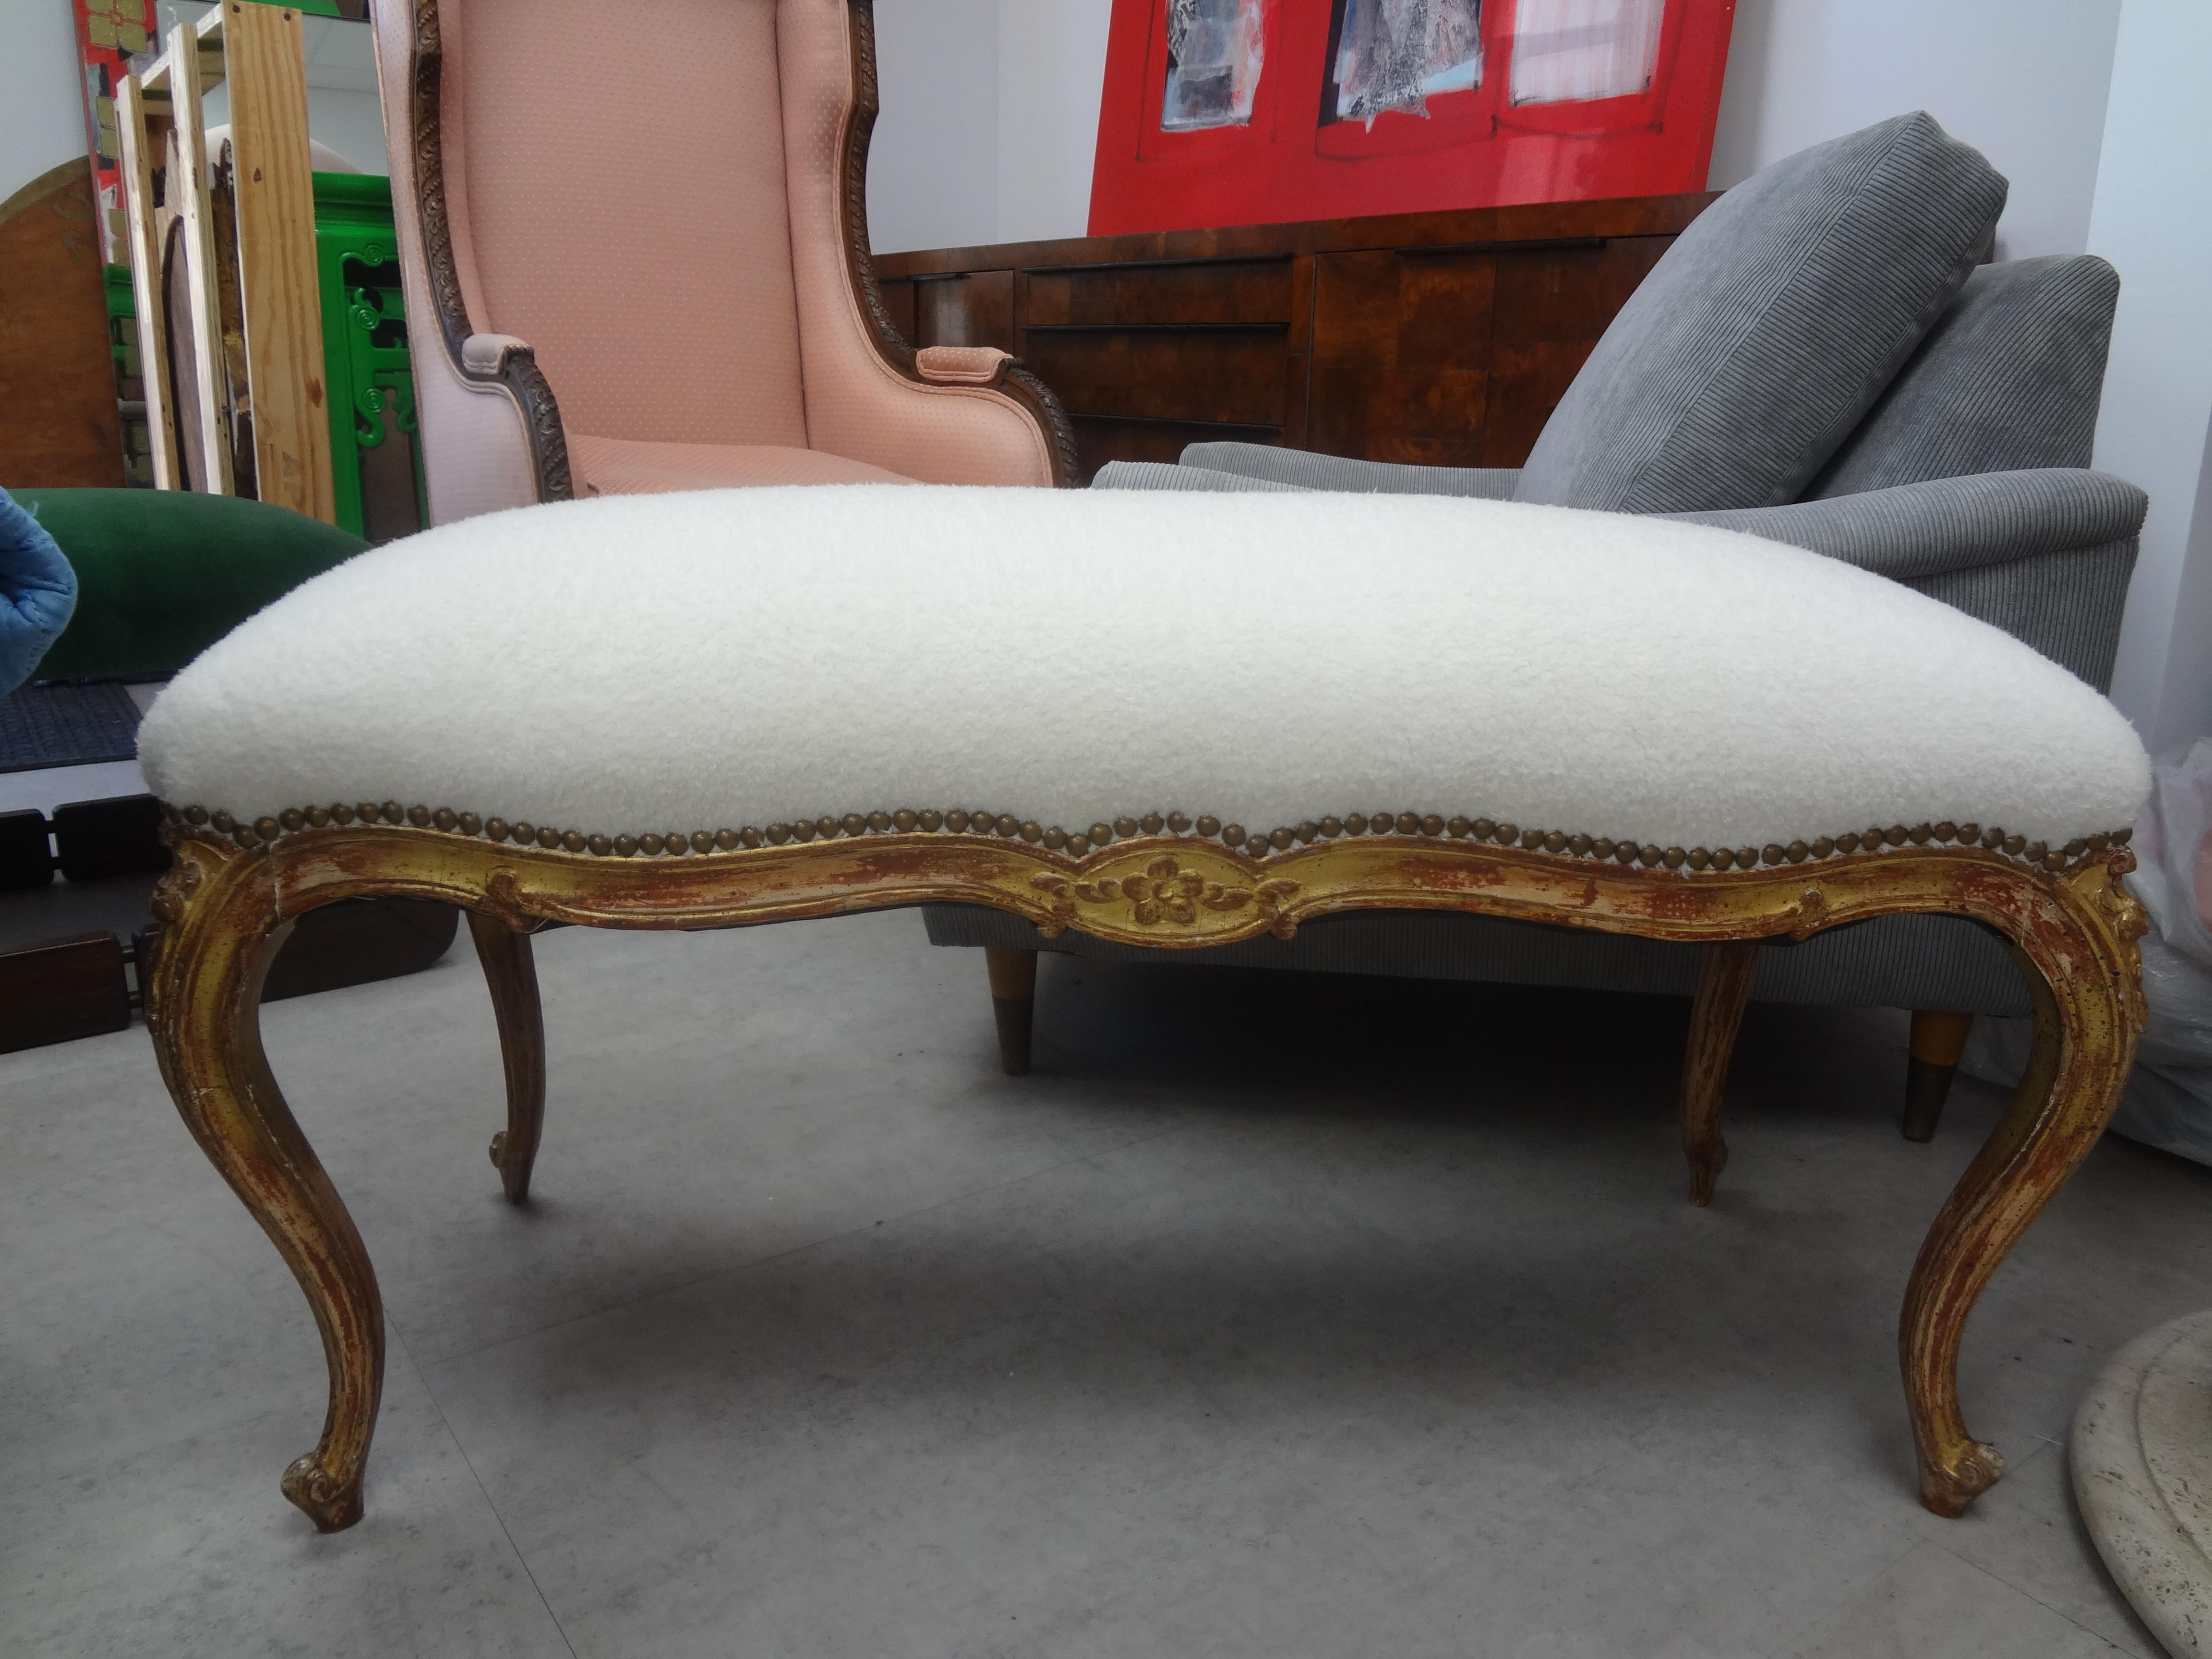 19th century French Louis XV style giltwood bench. This stunning antique French gilt wood bench has excellent patina and has been professionally upholstered in plush white velvet with brass nail head detail.